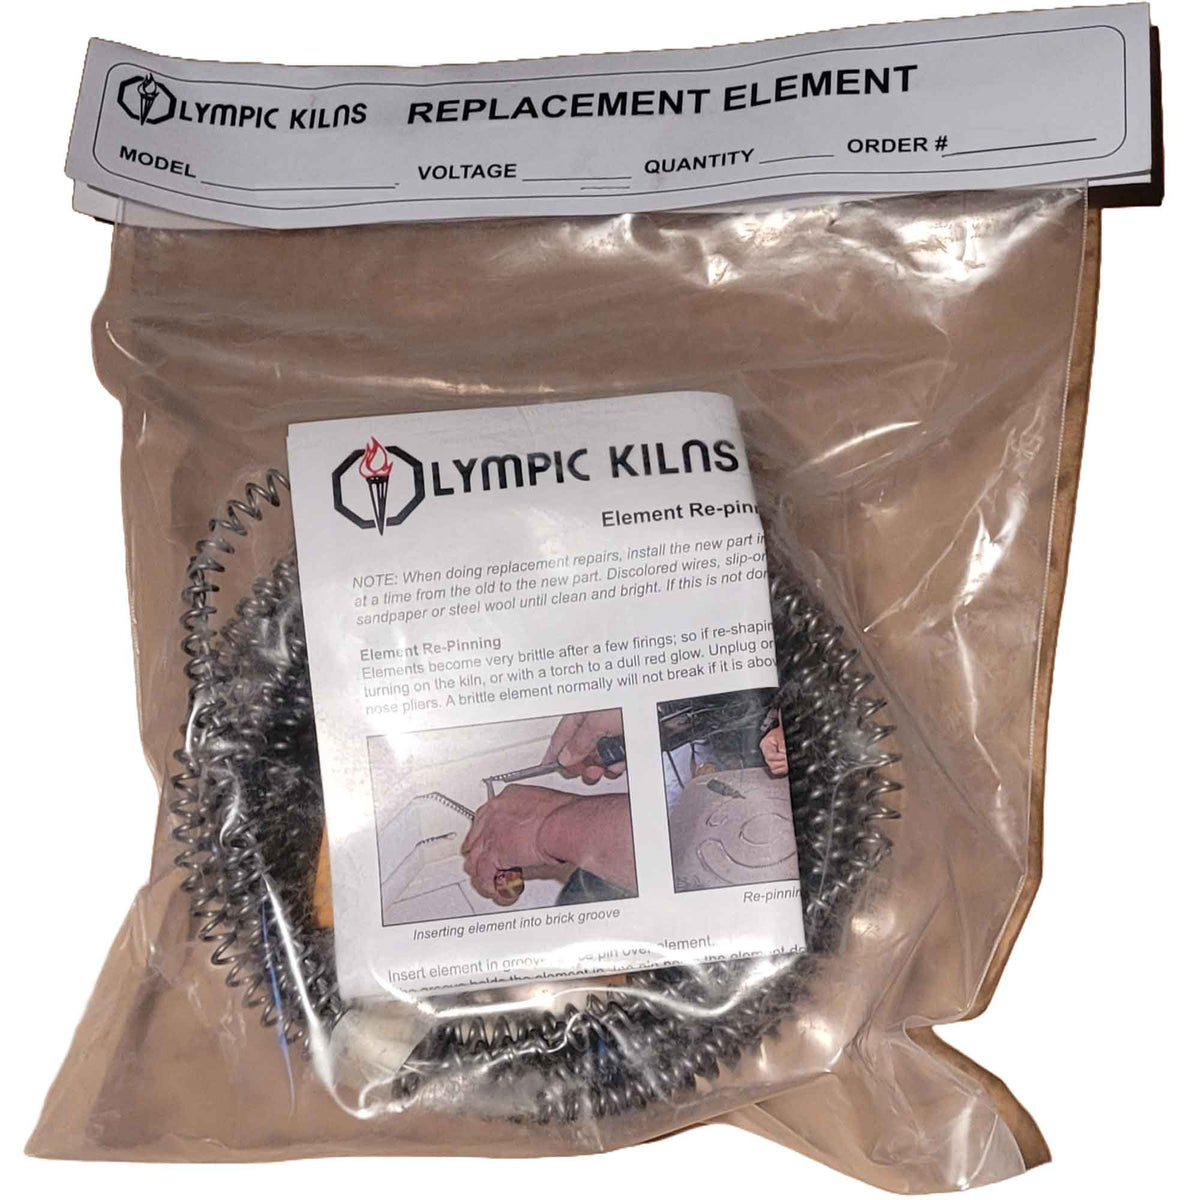 Olympic Kiln Replacement Element for Model 1818, 1818H, S18, S18A, S18HE, S18H or S18AH